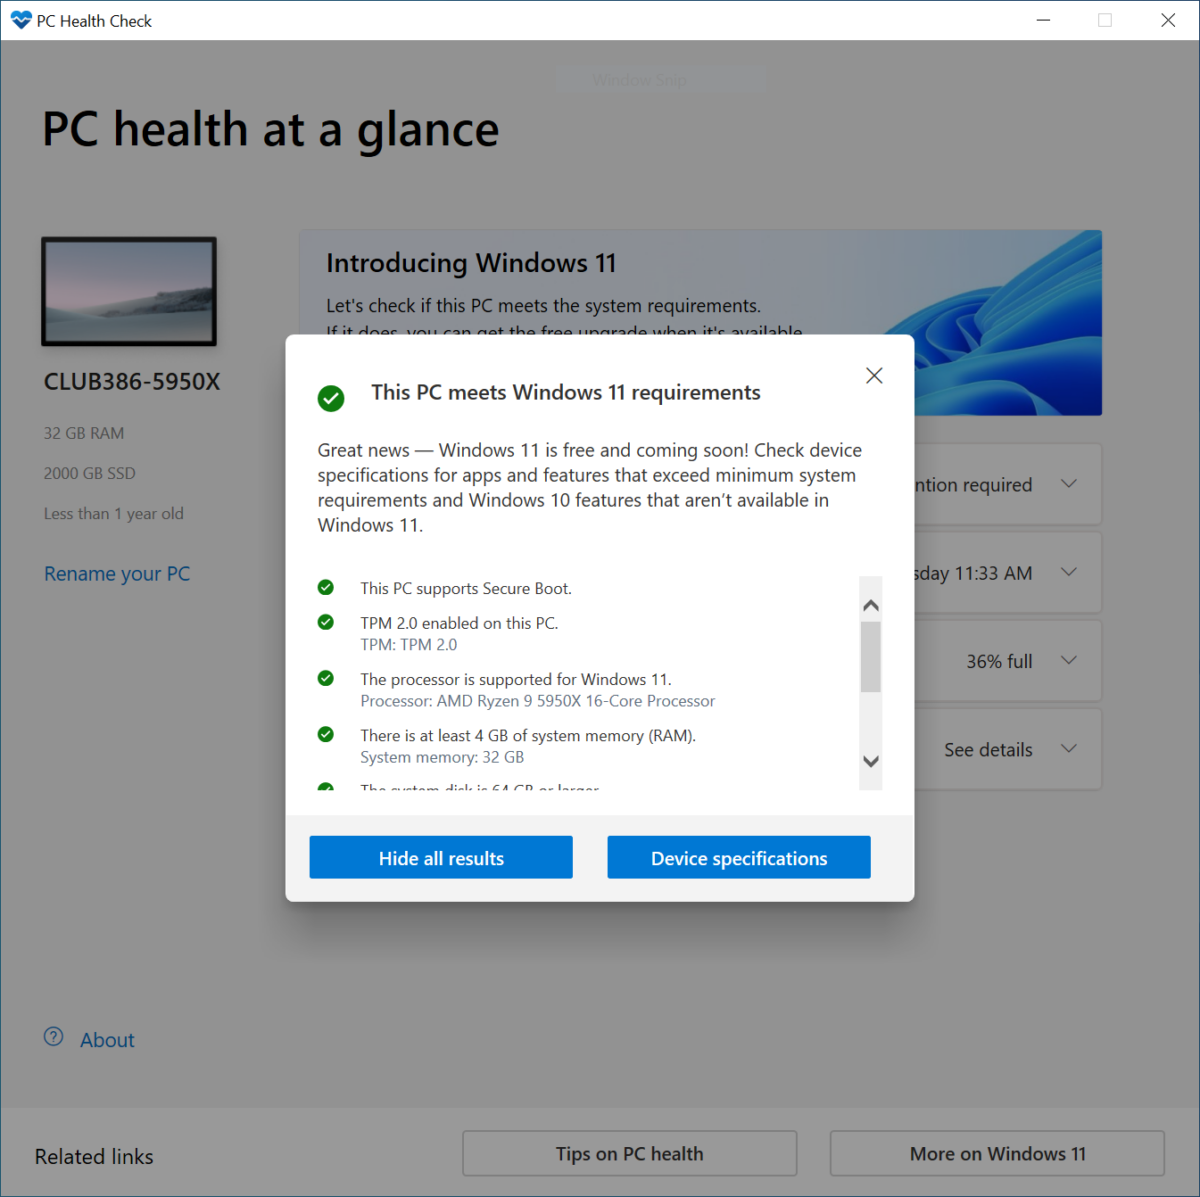 This PC meets Windows 11 requirements